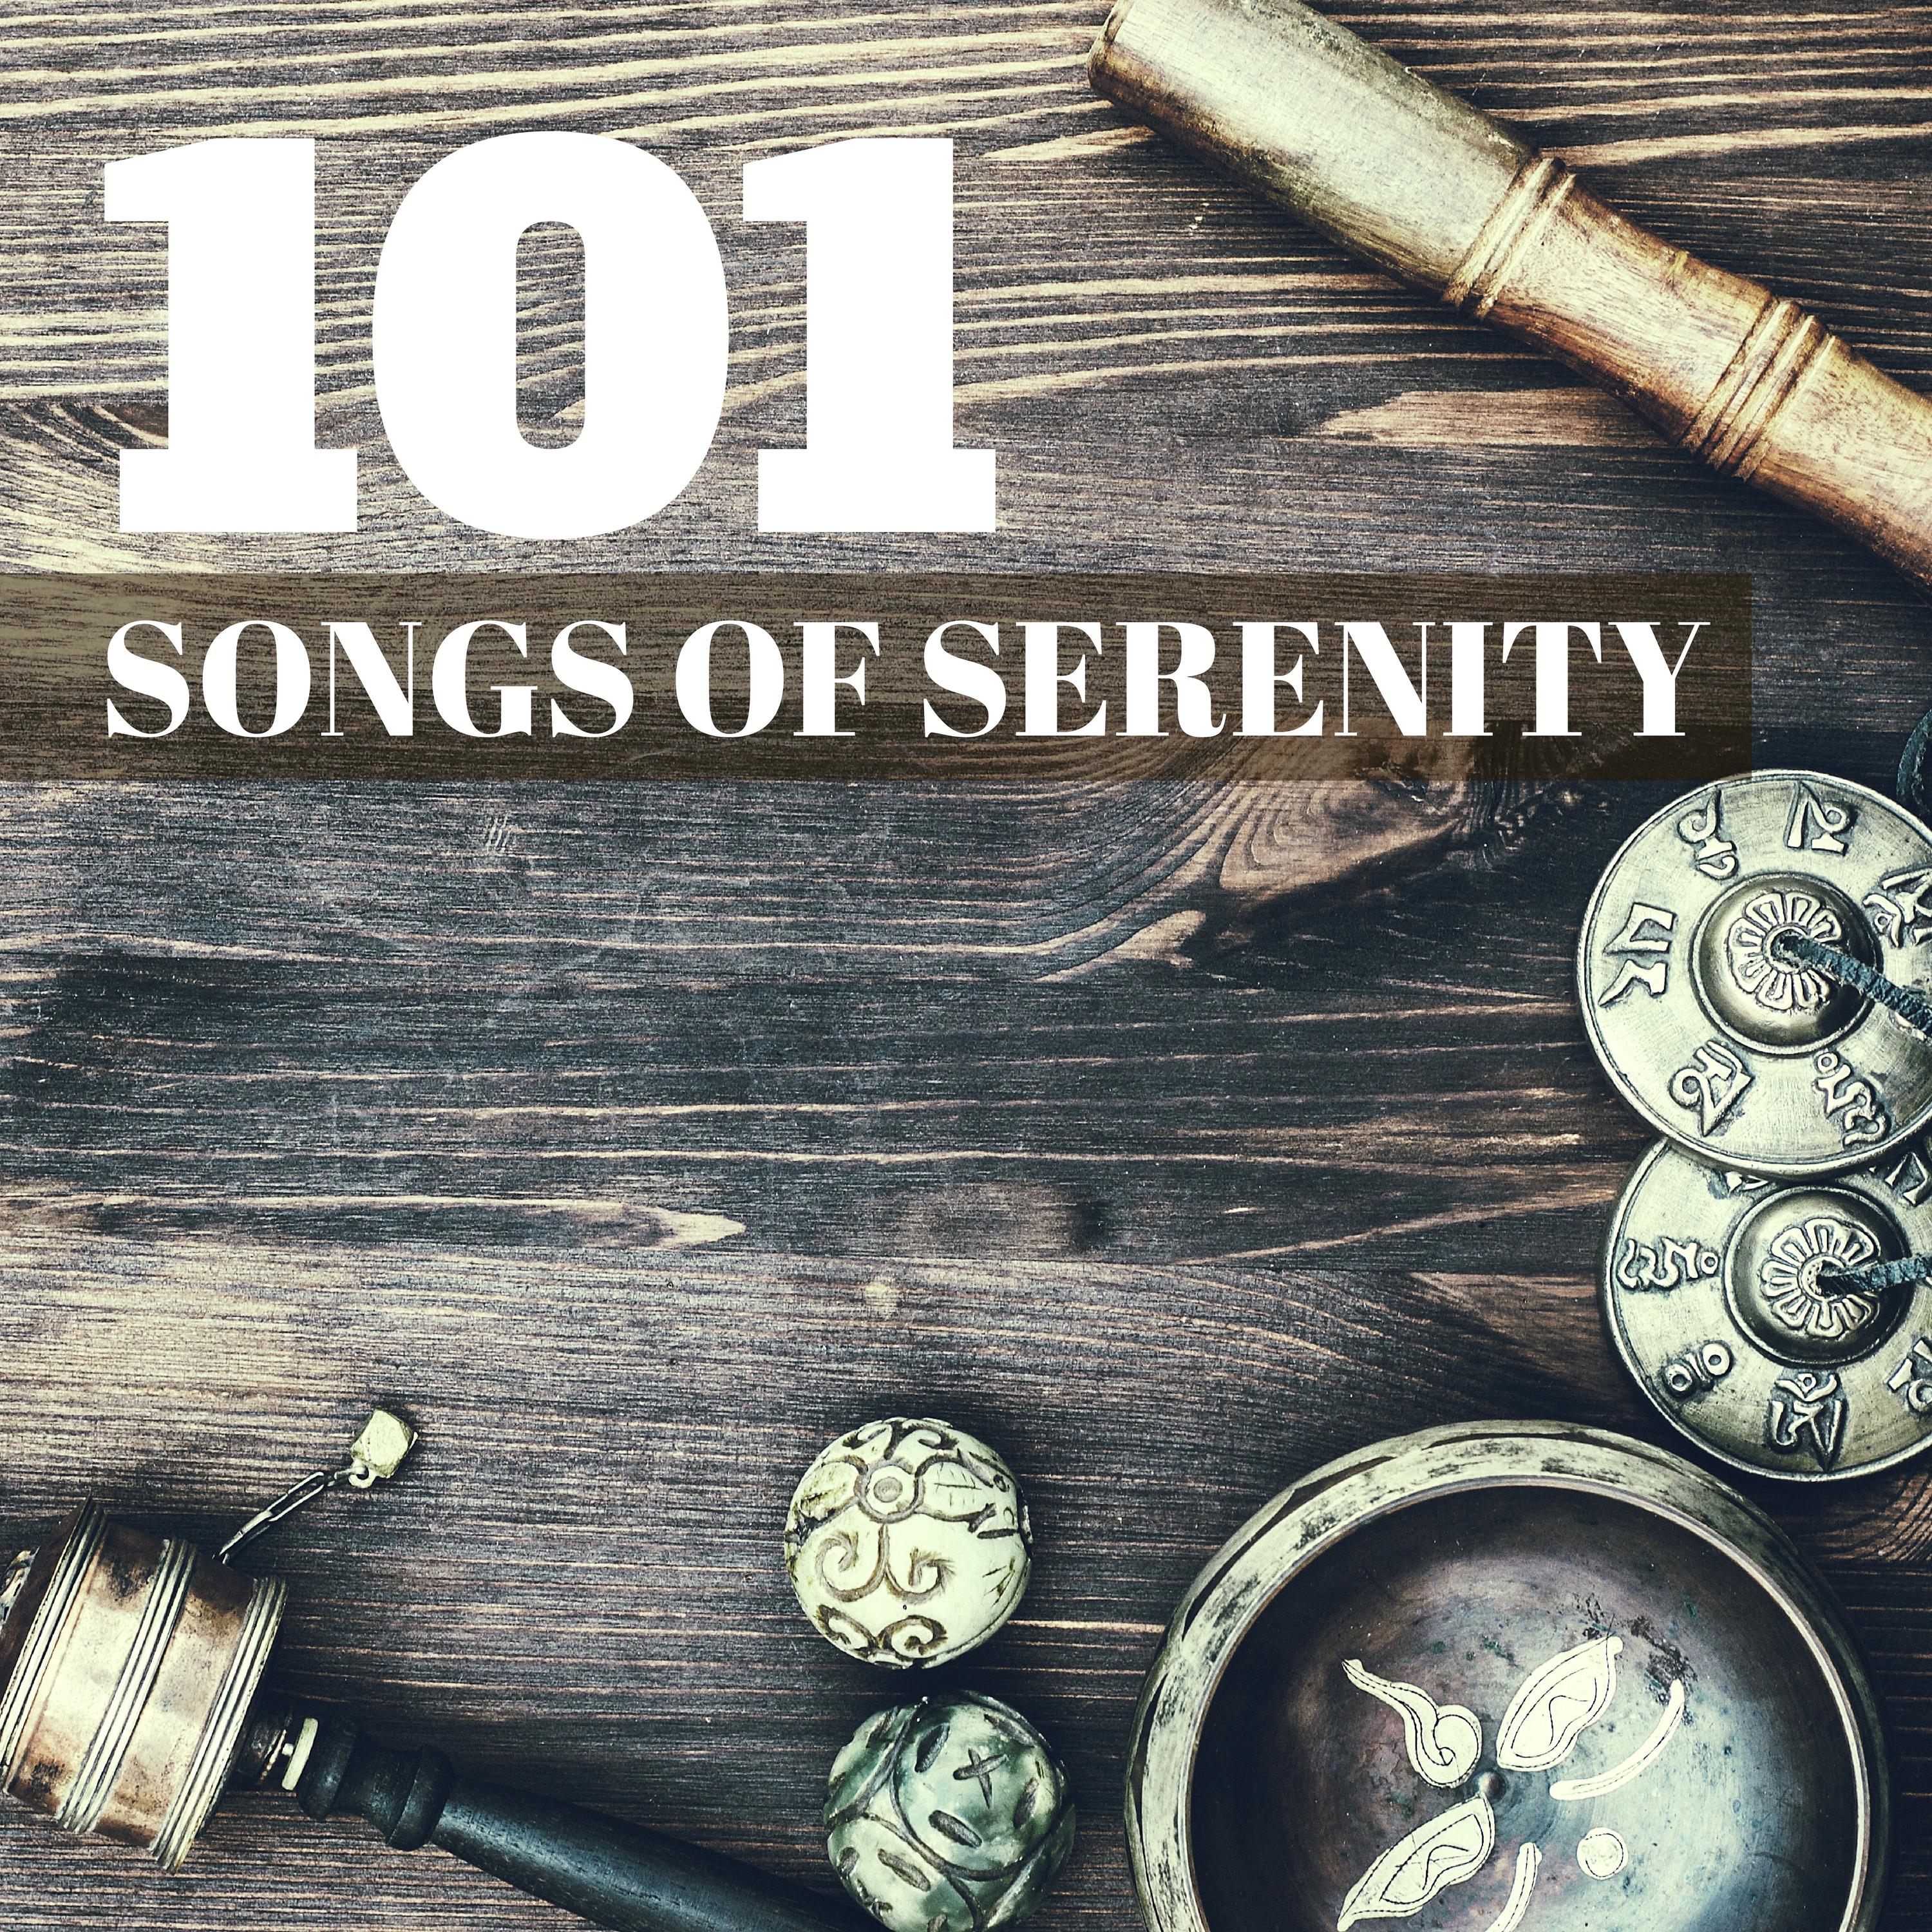 101 Songs of Serenity - Mindful Spirit Music for Tranquility State of Mind, Pure Relaxation